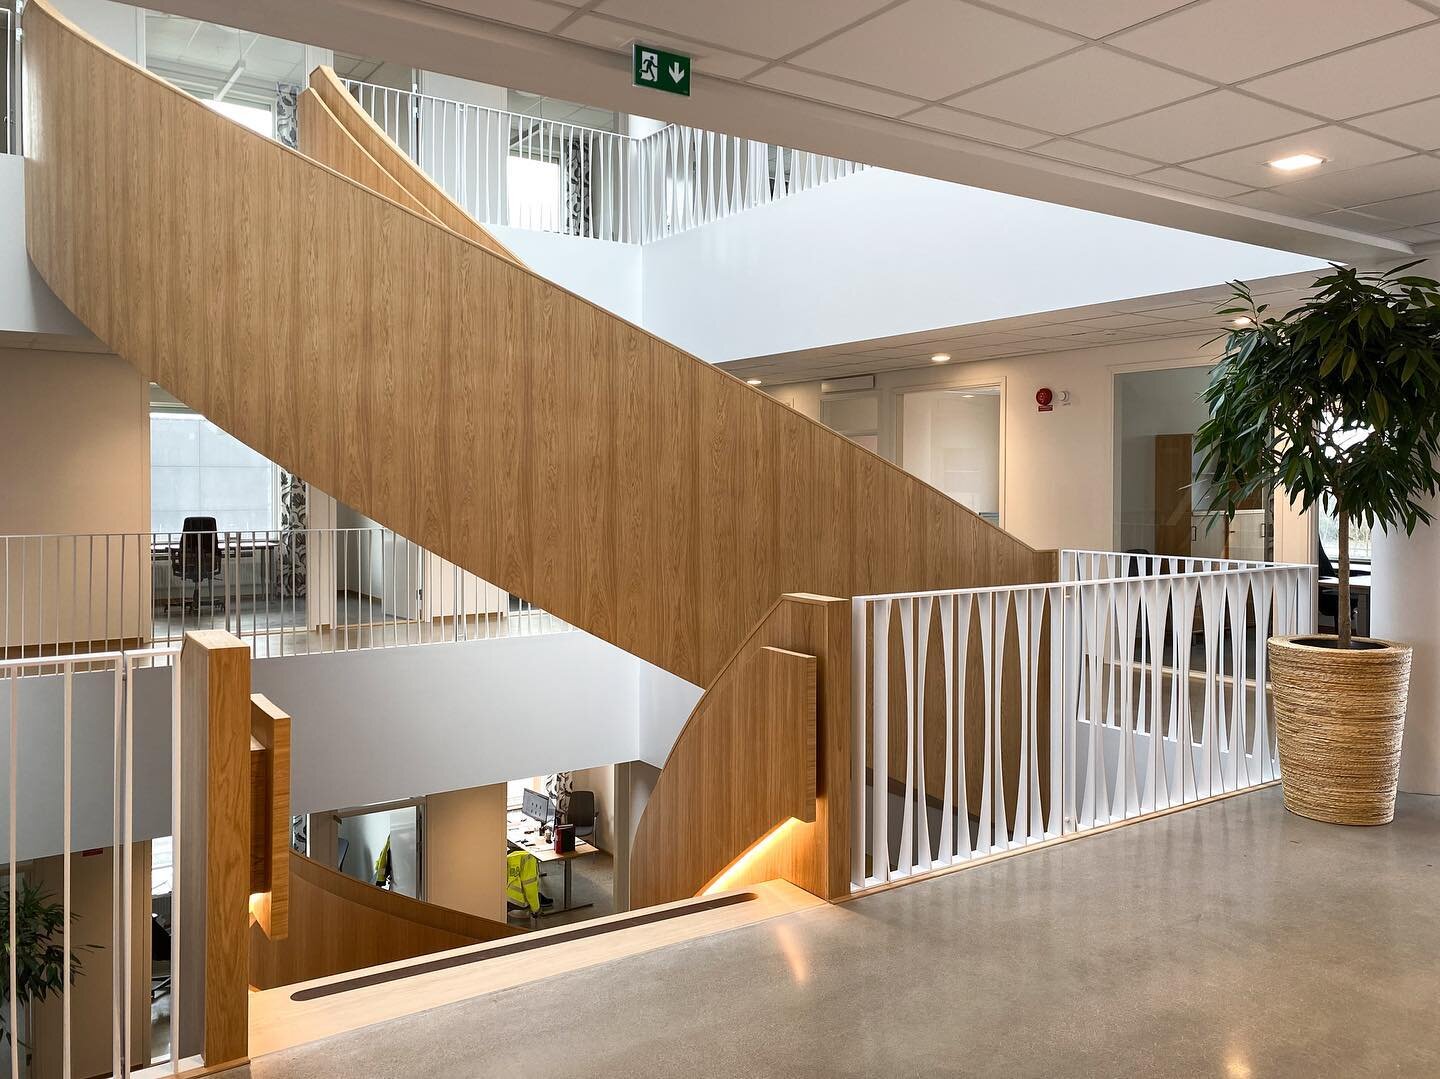 Real estate giants 3HUS @fastighetsab3hus and BAB bygg AB @babbygg2018 asked for stairs with unique looks and we answered with these two beauties. Curved steel staircase structure finished all around with oak wood and LED lighting on every step. Two 